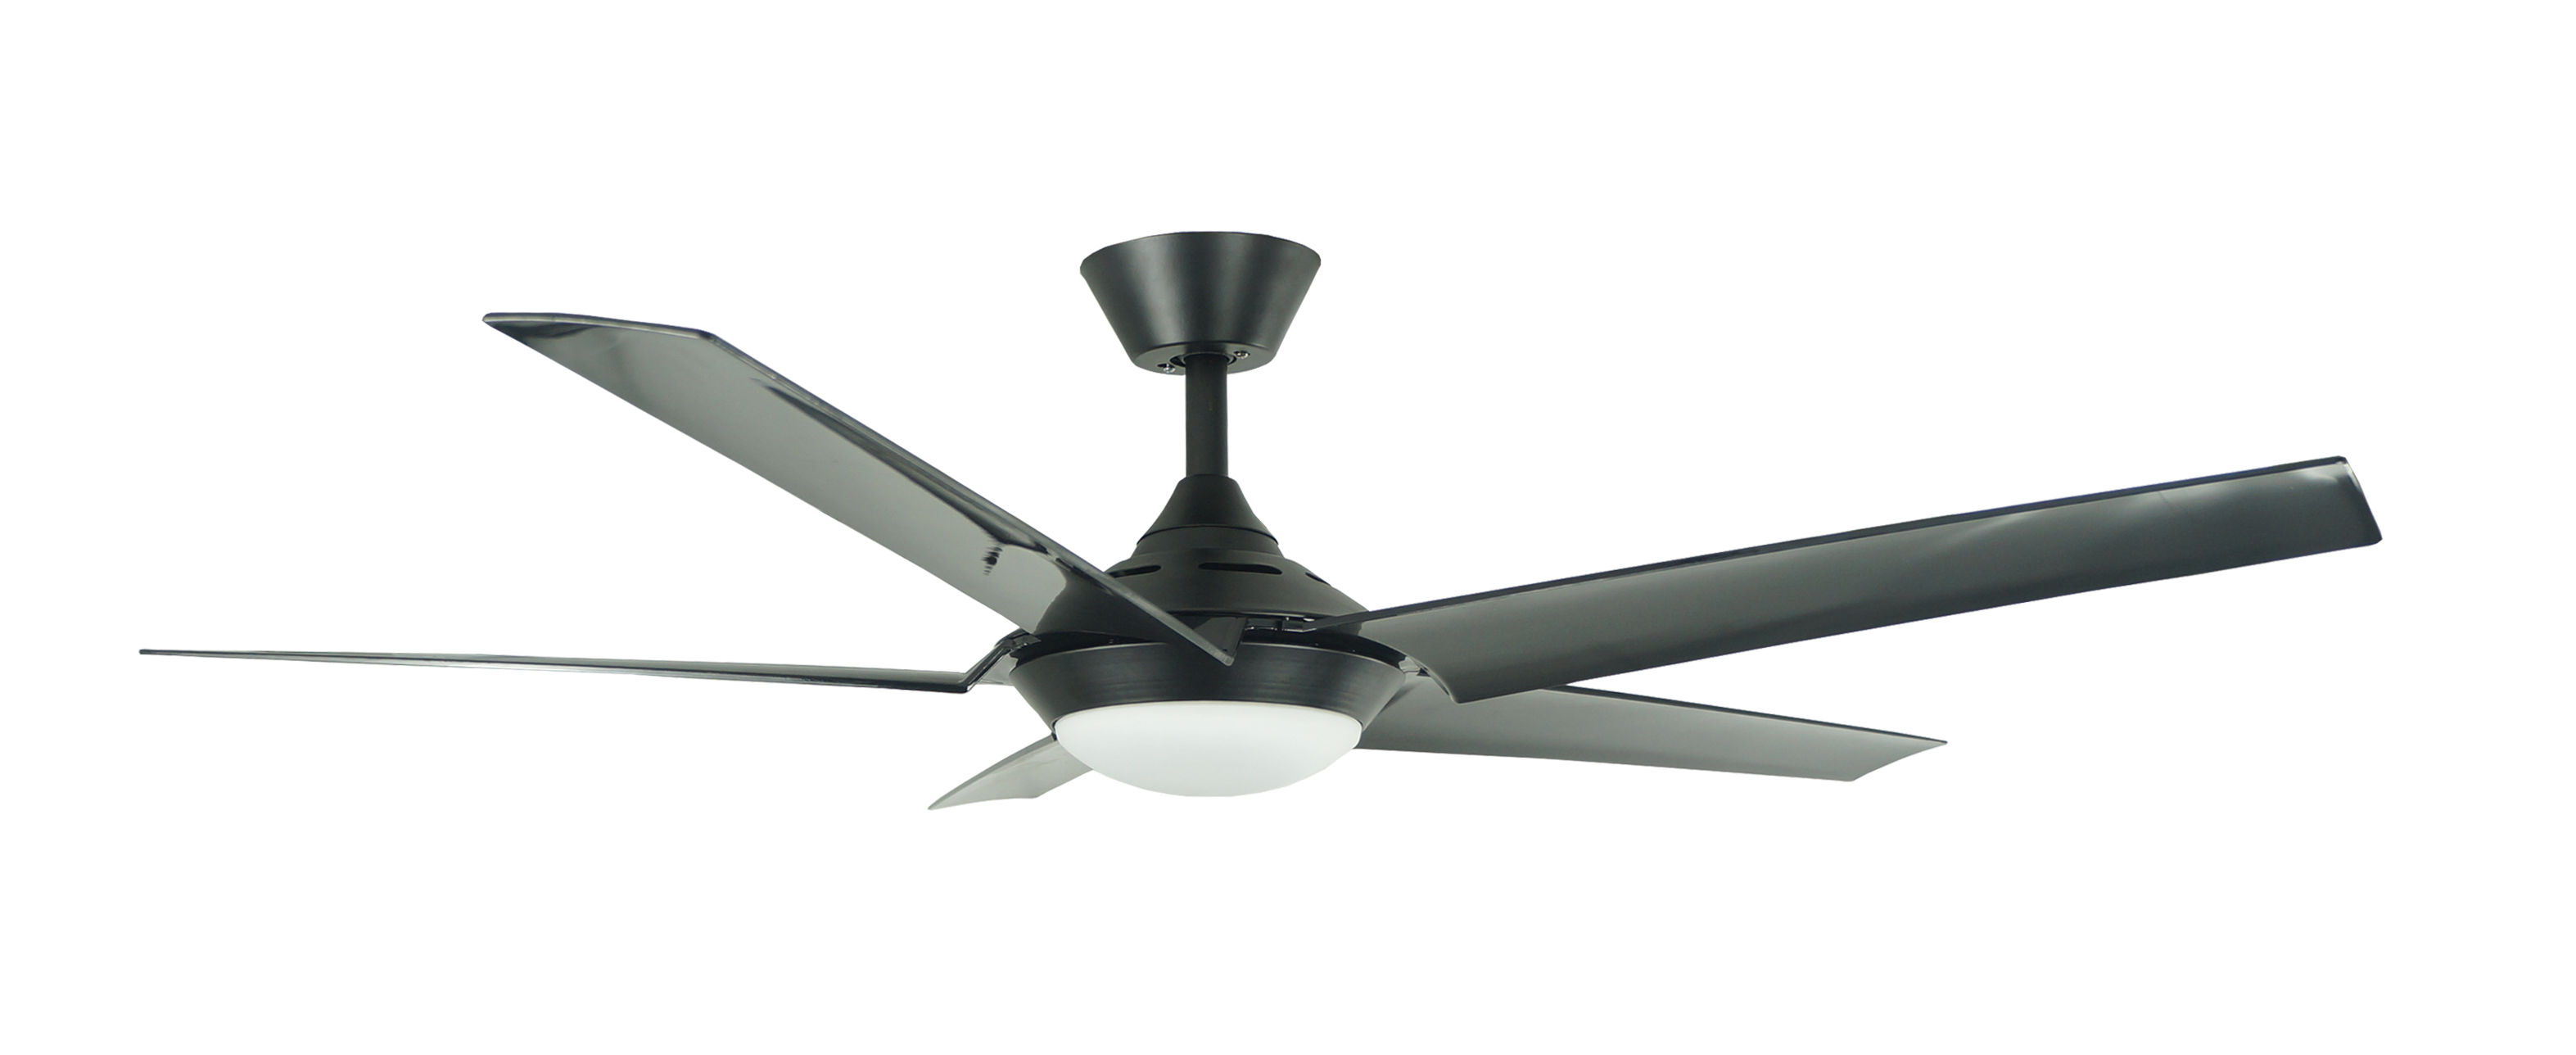 Airbena Ceiling Ceiling Fan 52 "ABS Fan Blade with And without Light for Household Ceiling Fans